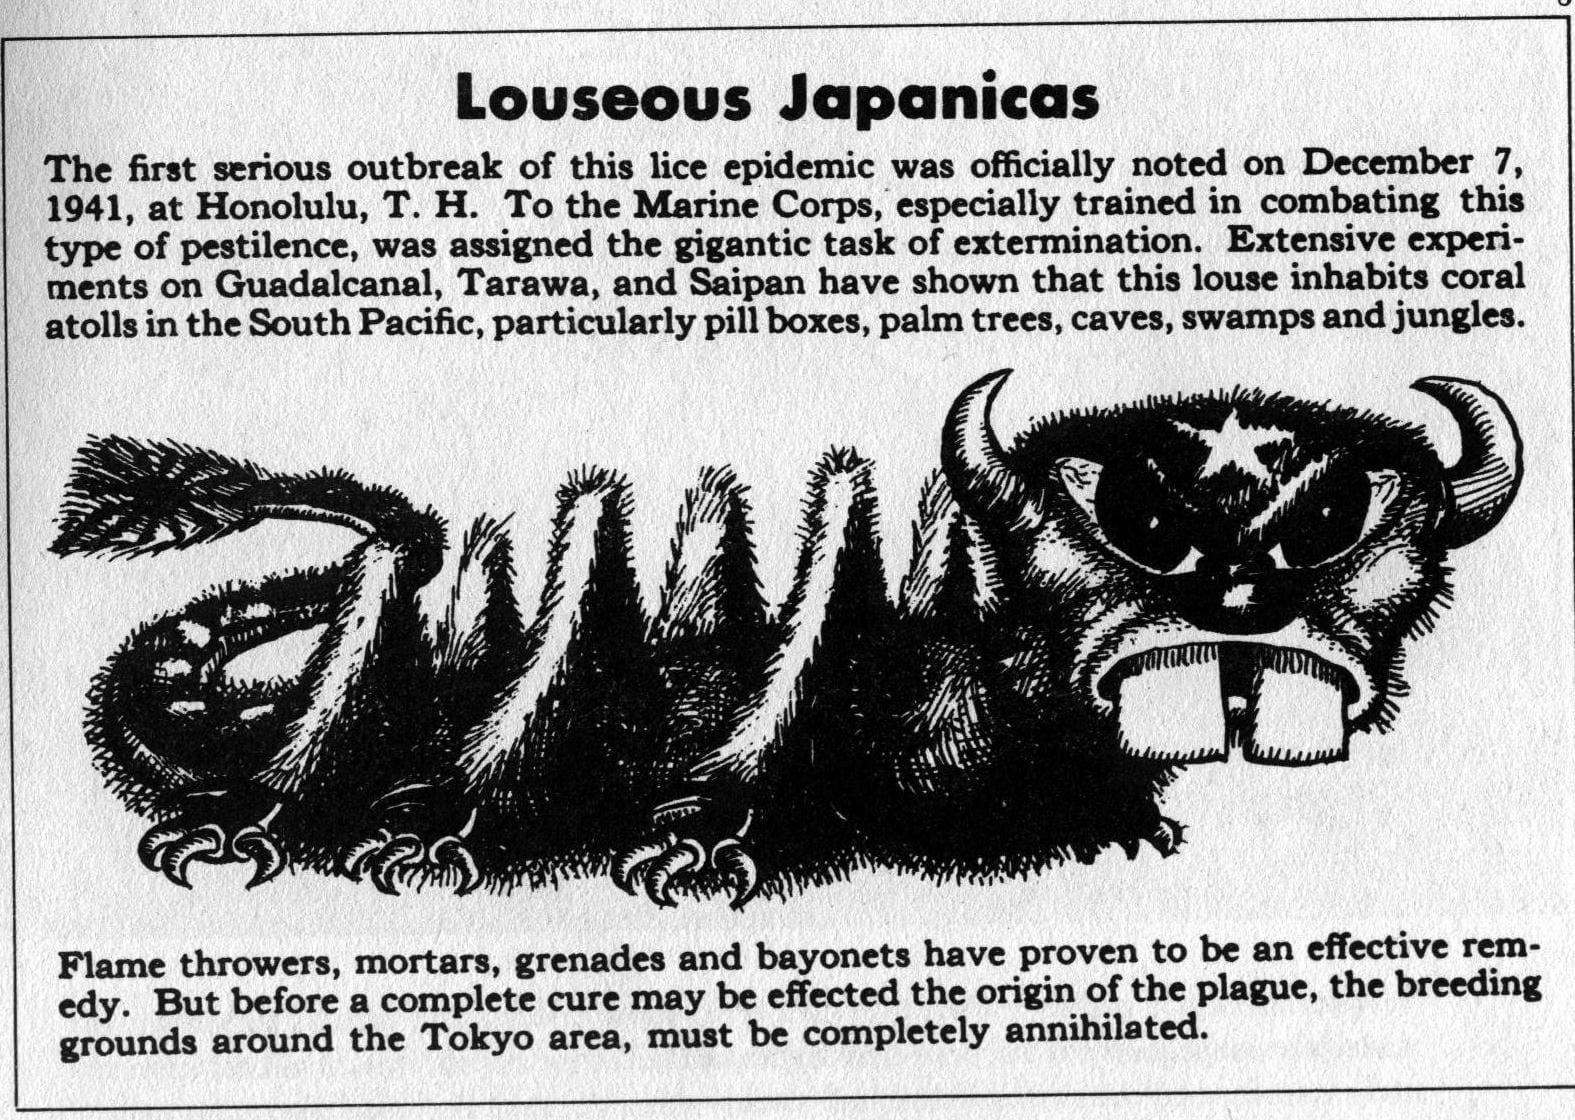 Louseous Japanicas The first serious outbreak of this lice epidemic was officially noted on December 7, 1941, at Honolulu, T. H. To the Marine Corps, especially trained in combating this type of pestilence, was assigned the gigantic task of extermination. Extensive cxperiments on Guadalcanal, Tarawa, and Saipan have shown that this louse inhabits coral atolls in the South Pacific, particularly pill boxes, palm trees, caves, swamps and jungles.  A disgusting racist caricature of an insect with buck teeth, evil, slanted eyes, and a tail that has the paytern of imperial Japan's flag.  Flame throwers, mortars, grenades and bayonets have proven to be an cffective remedy. But before a complete cure may be effected the origin of the plague, the breeding grounds around the Tokyo area, must be completely annihilated.